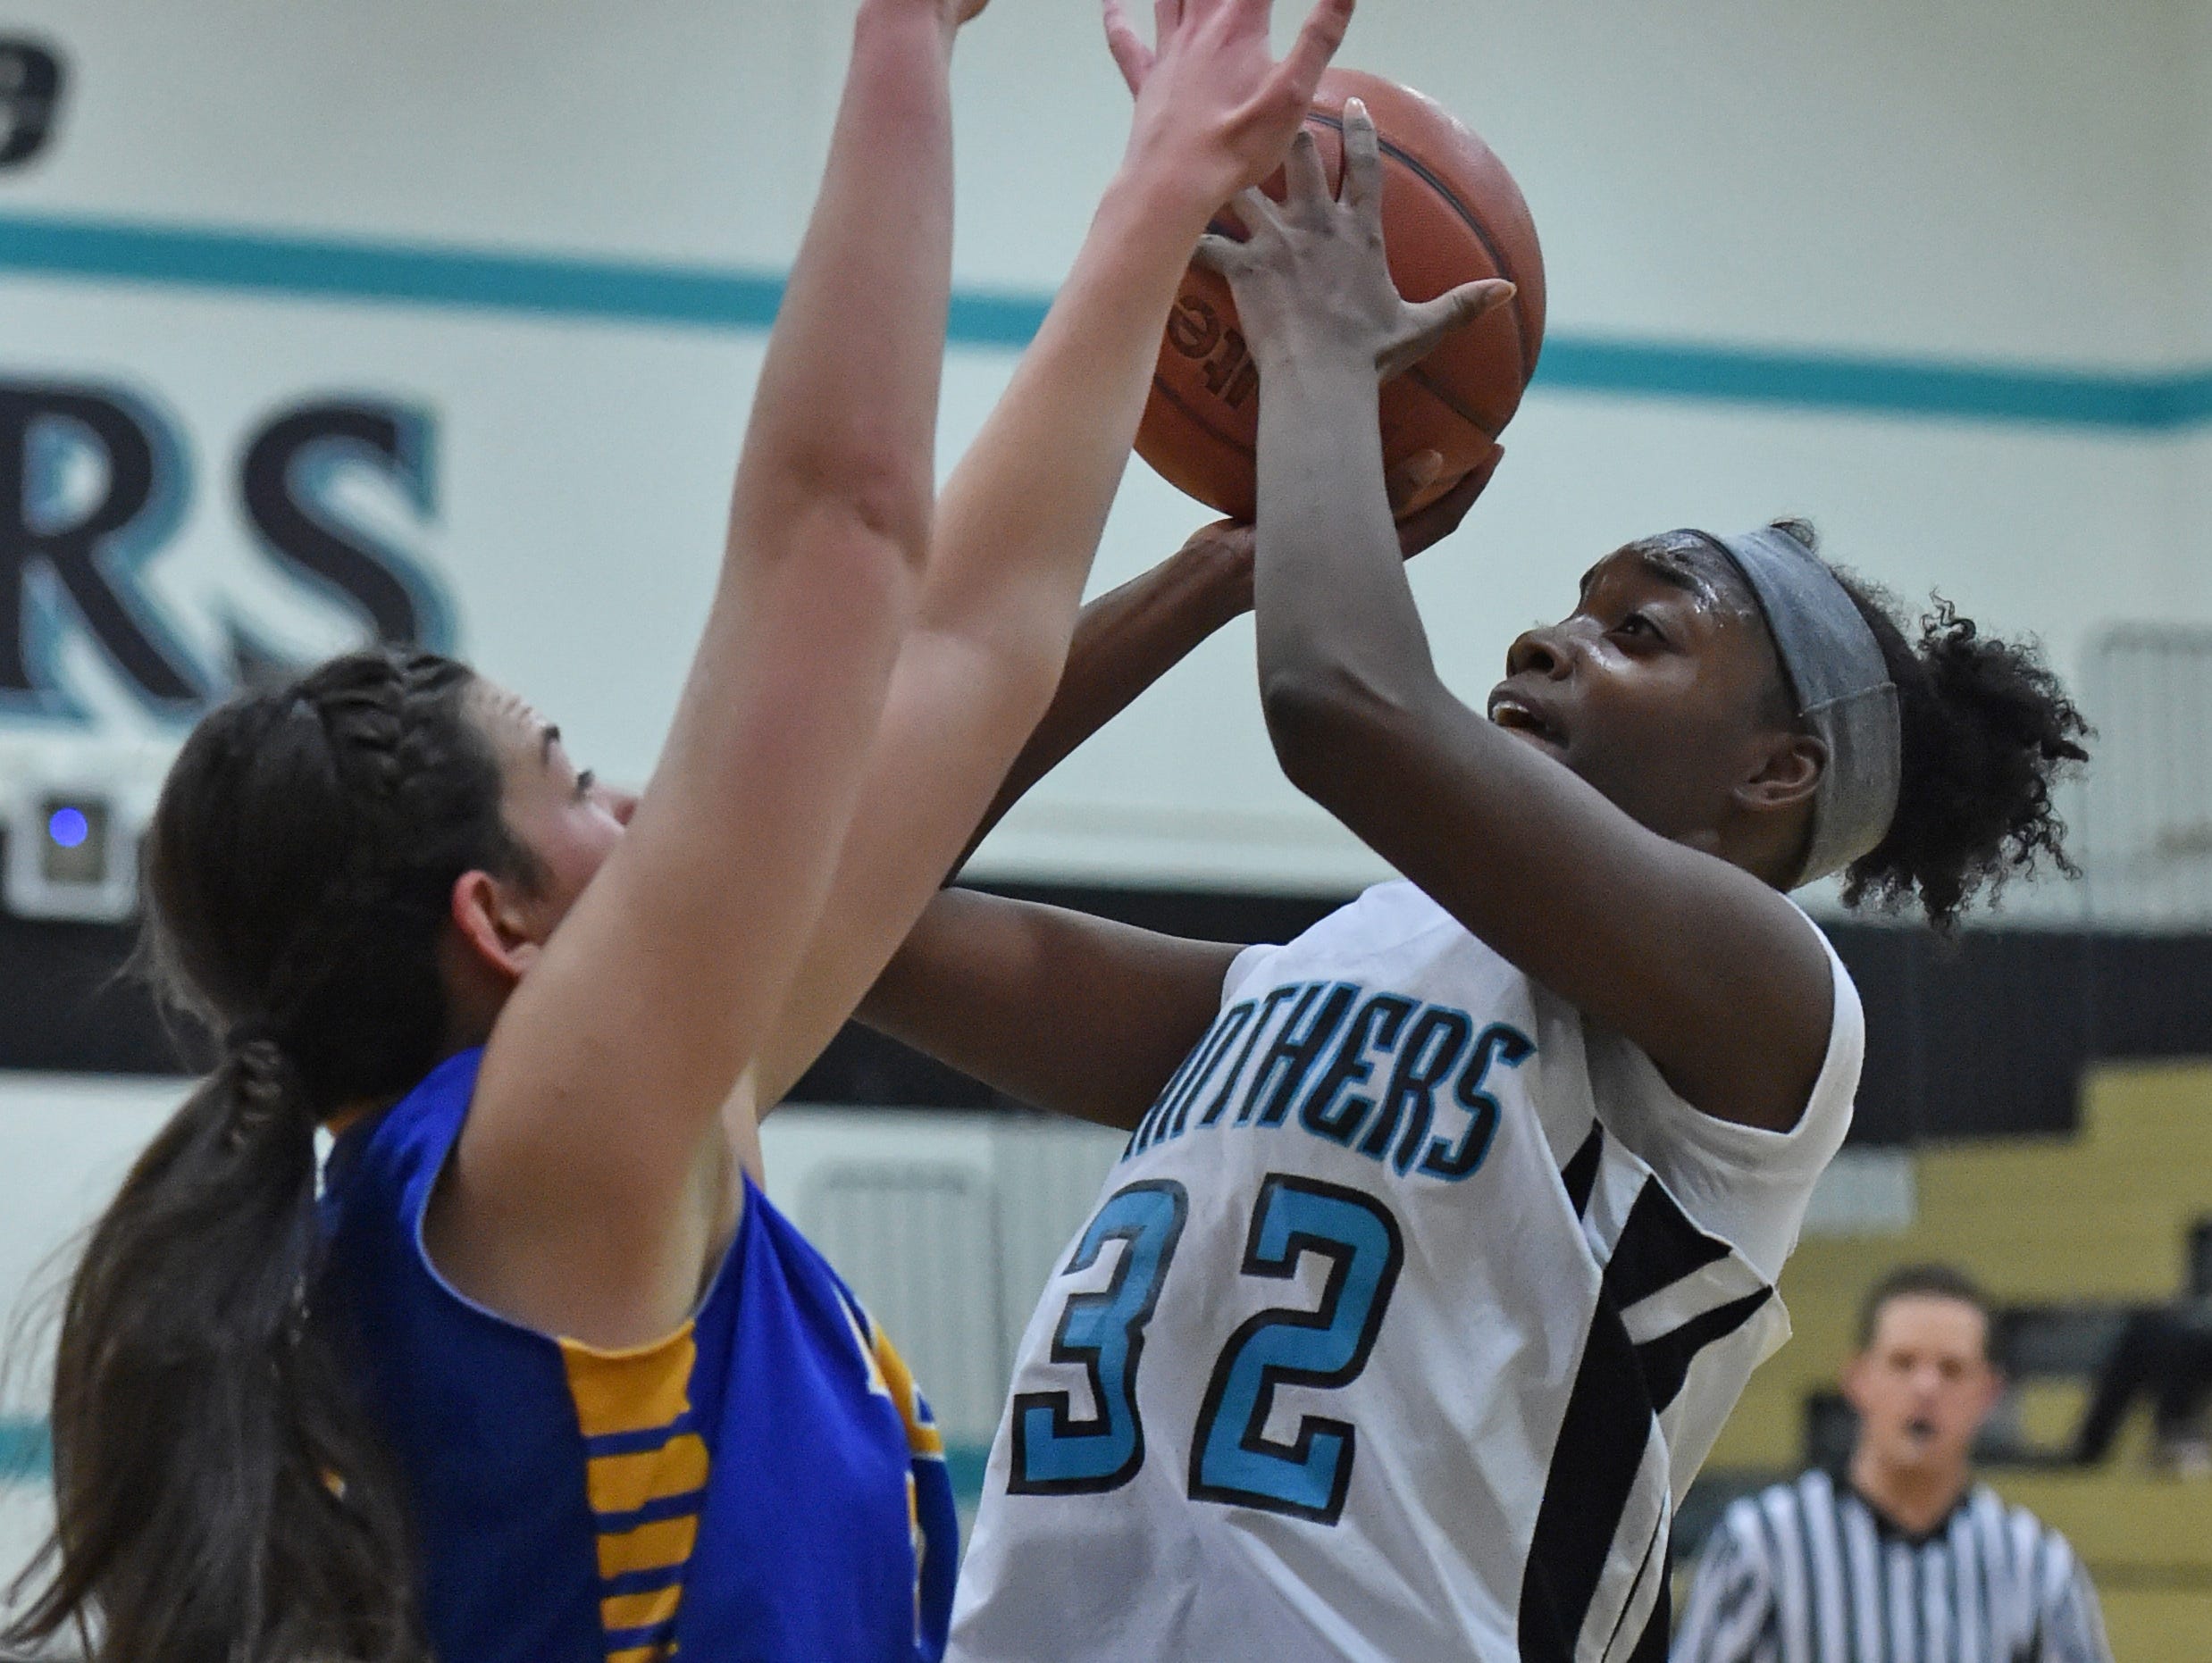 North Valleys' Passion Burrell shoots with Reed's Tori Baer covering her during Tuesday's game at North Valleys